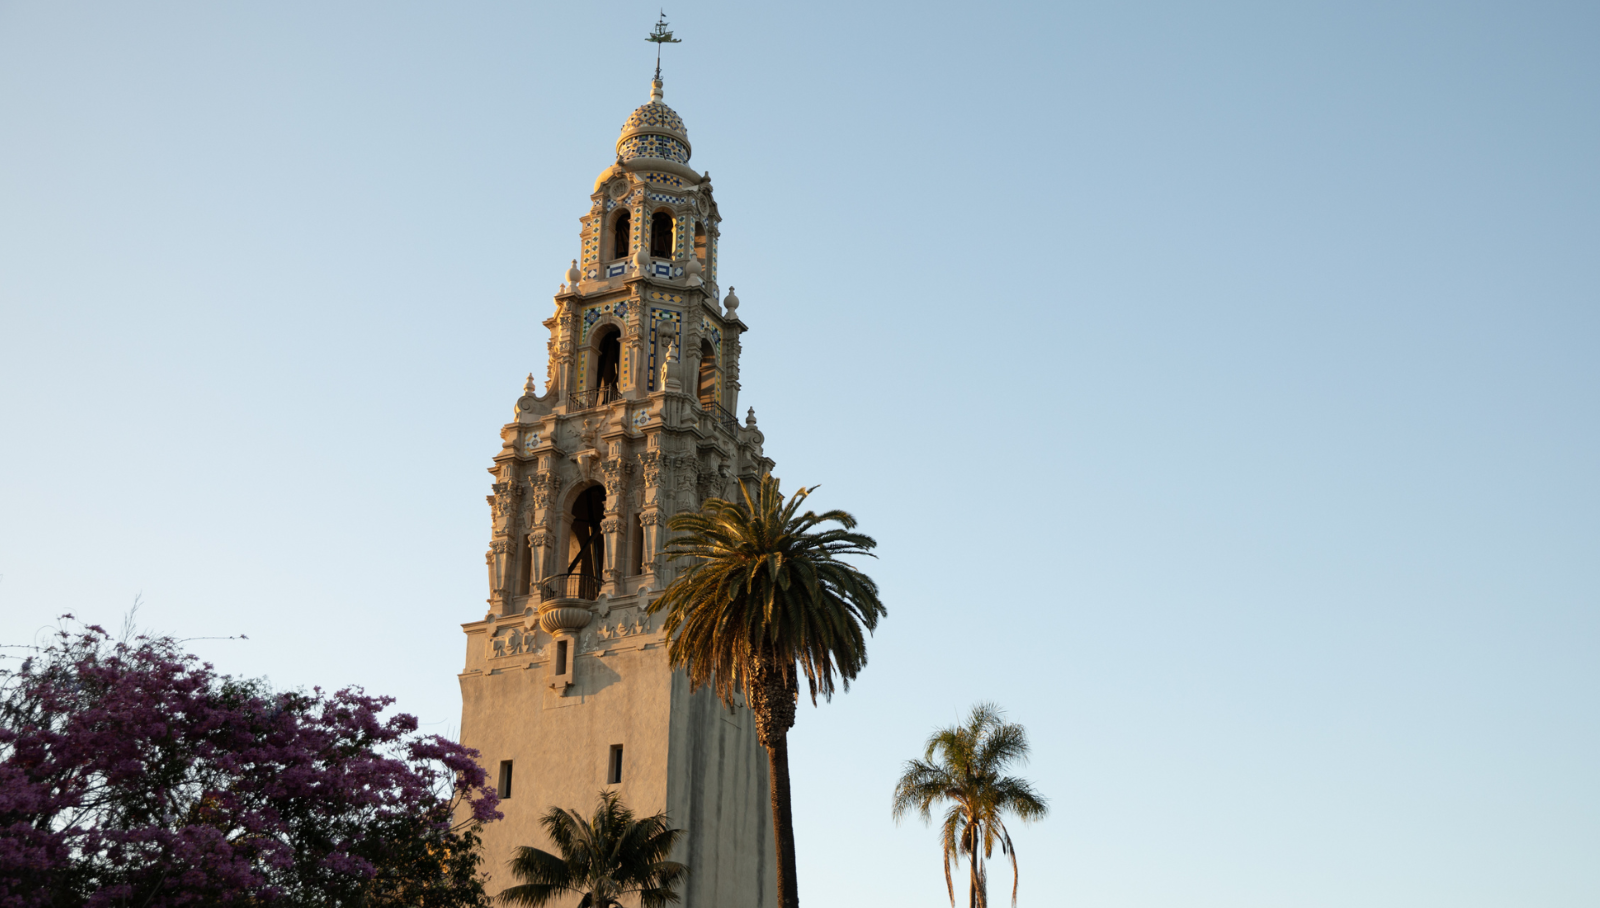 View of California Tower in the early evening, with palm trees in the foreground.